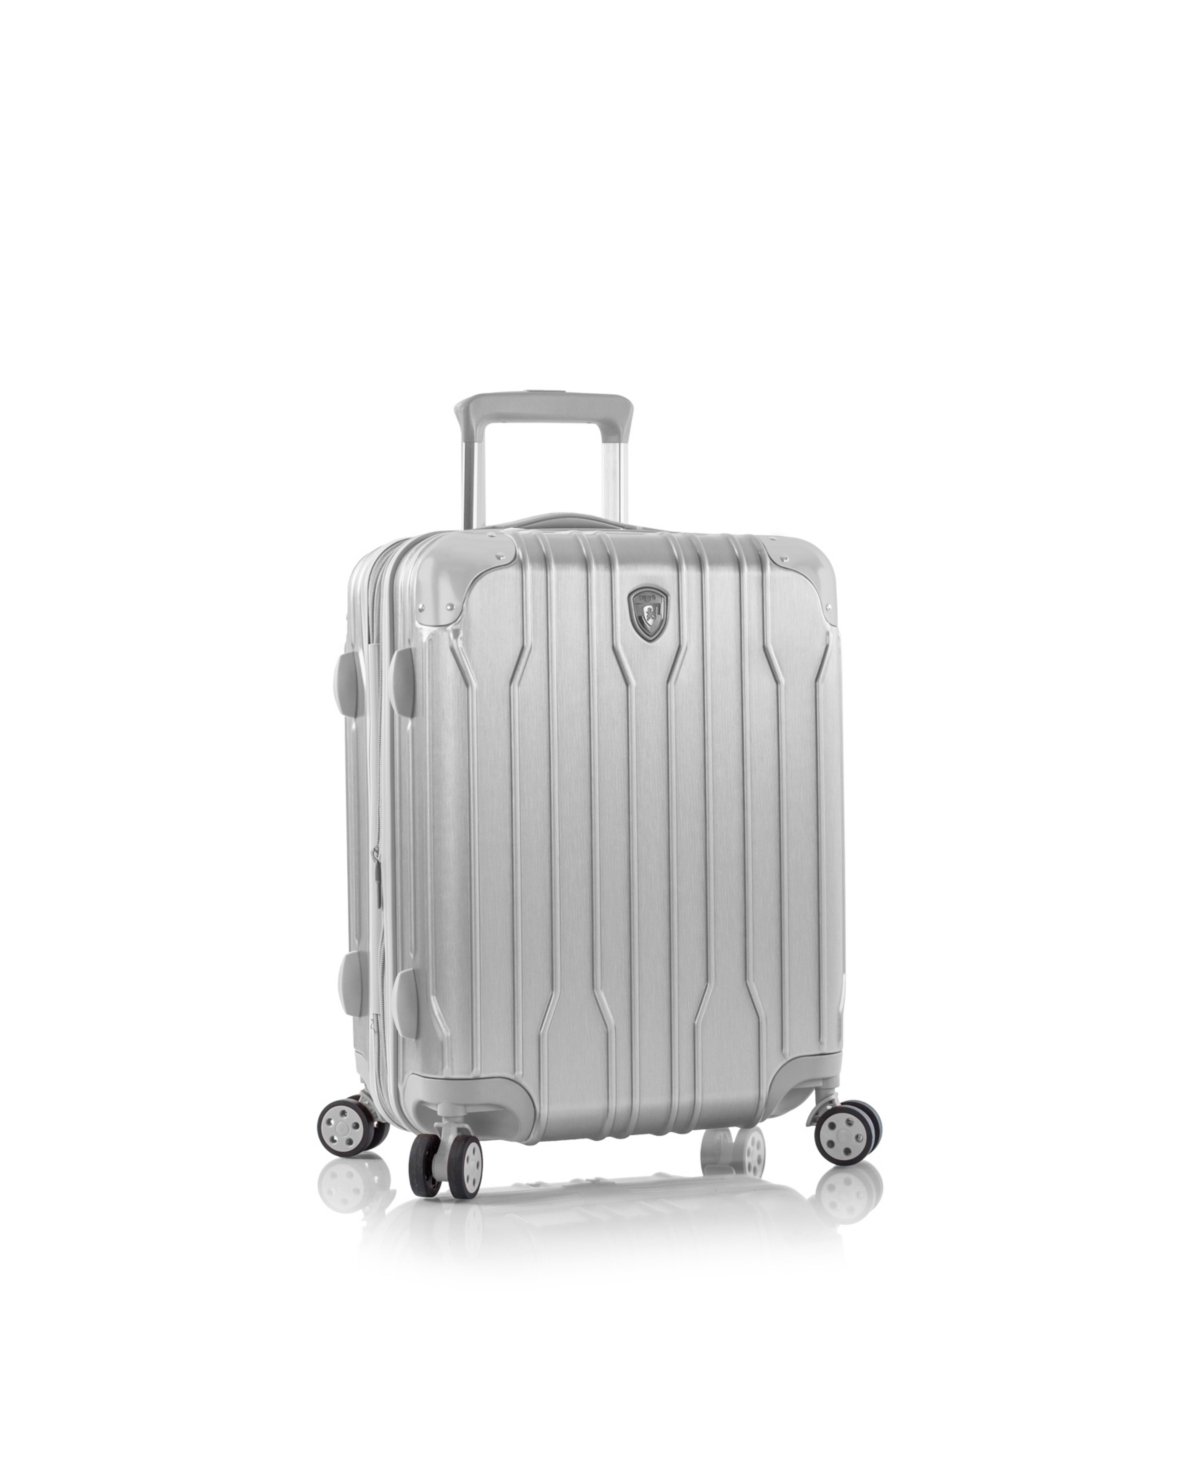 Heys Xtrak 21" Hardside Carry-on Spinner Luggage In Silver